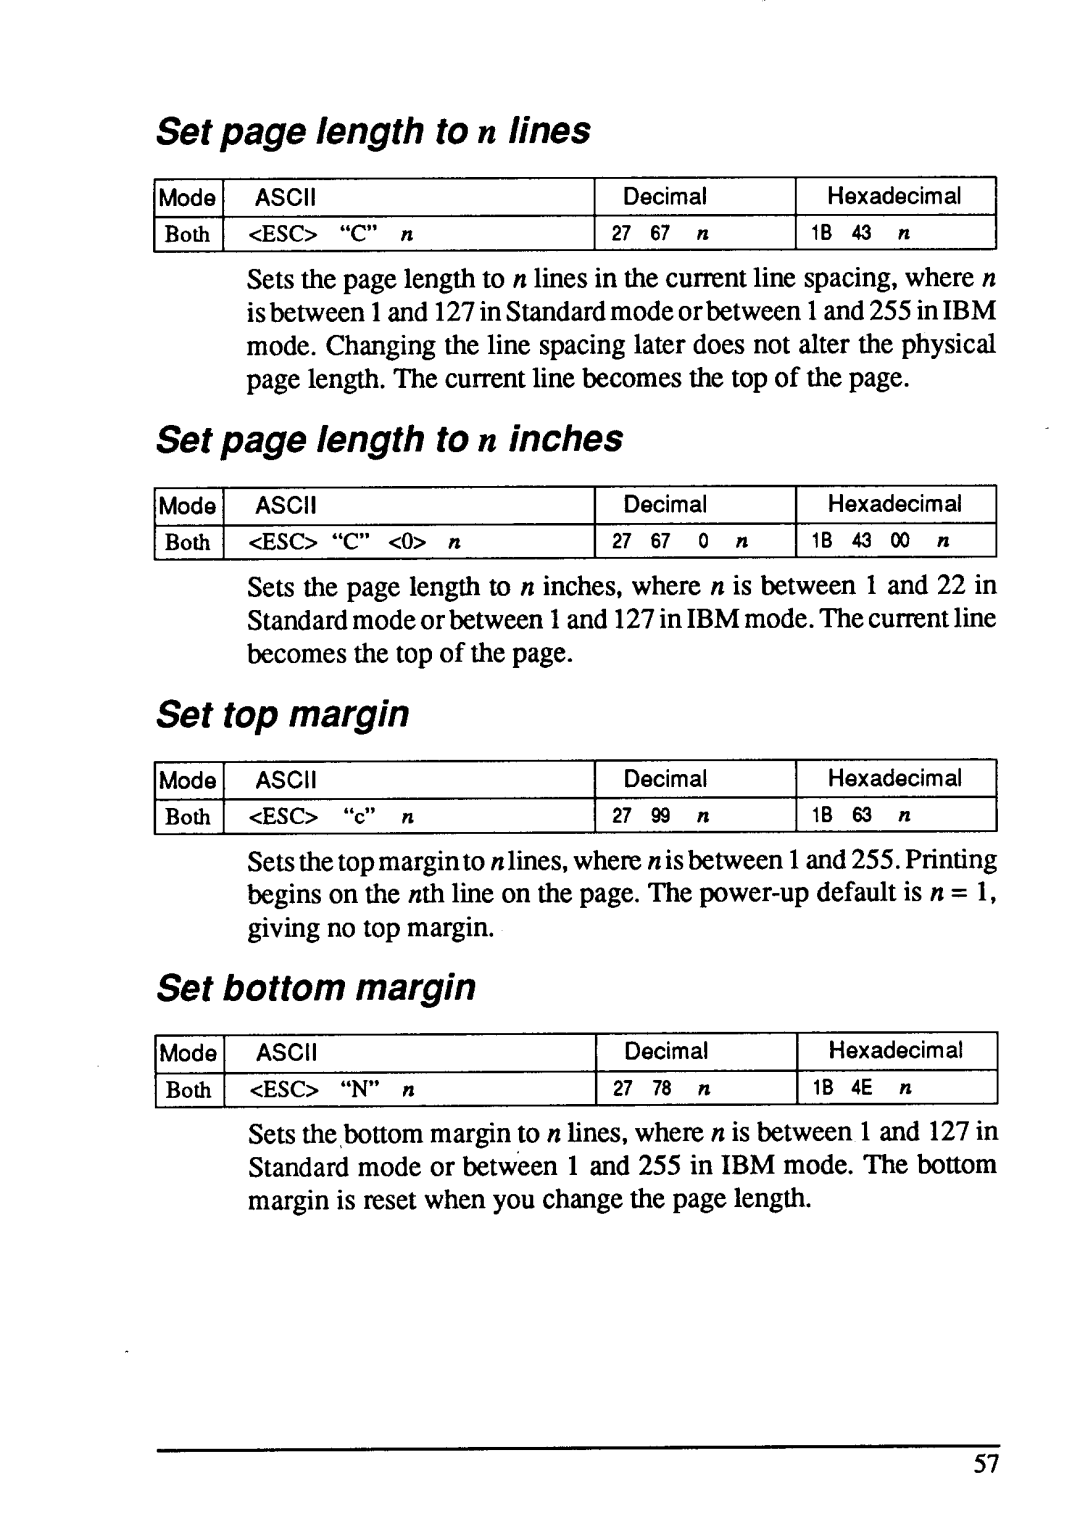 Star Micronics LC24-15 Set page length to n lines, Set page length to n inches, Set top margin, Set bottom margin, 27 67 n 